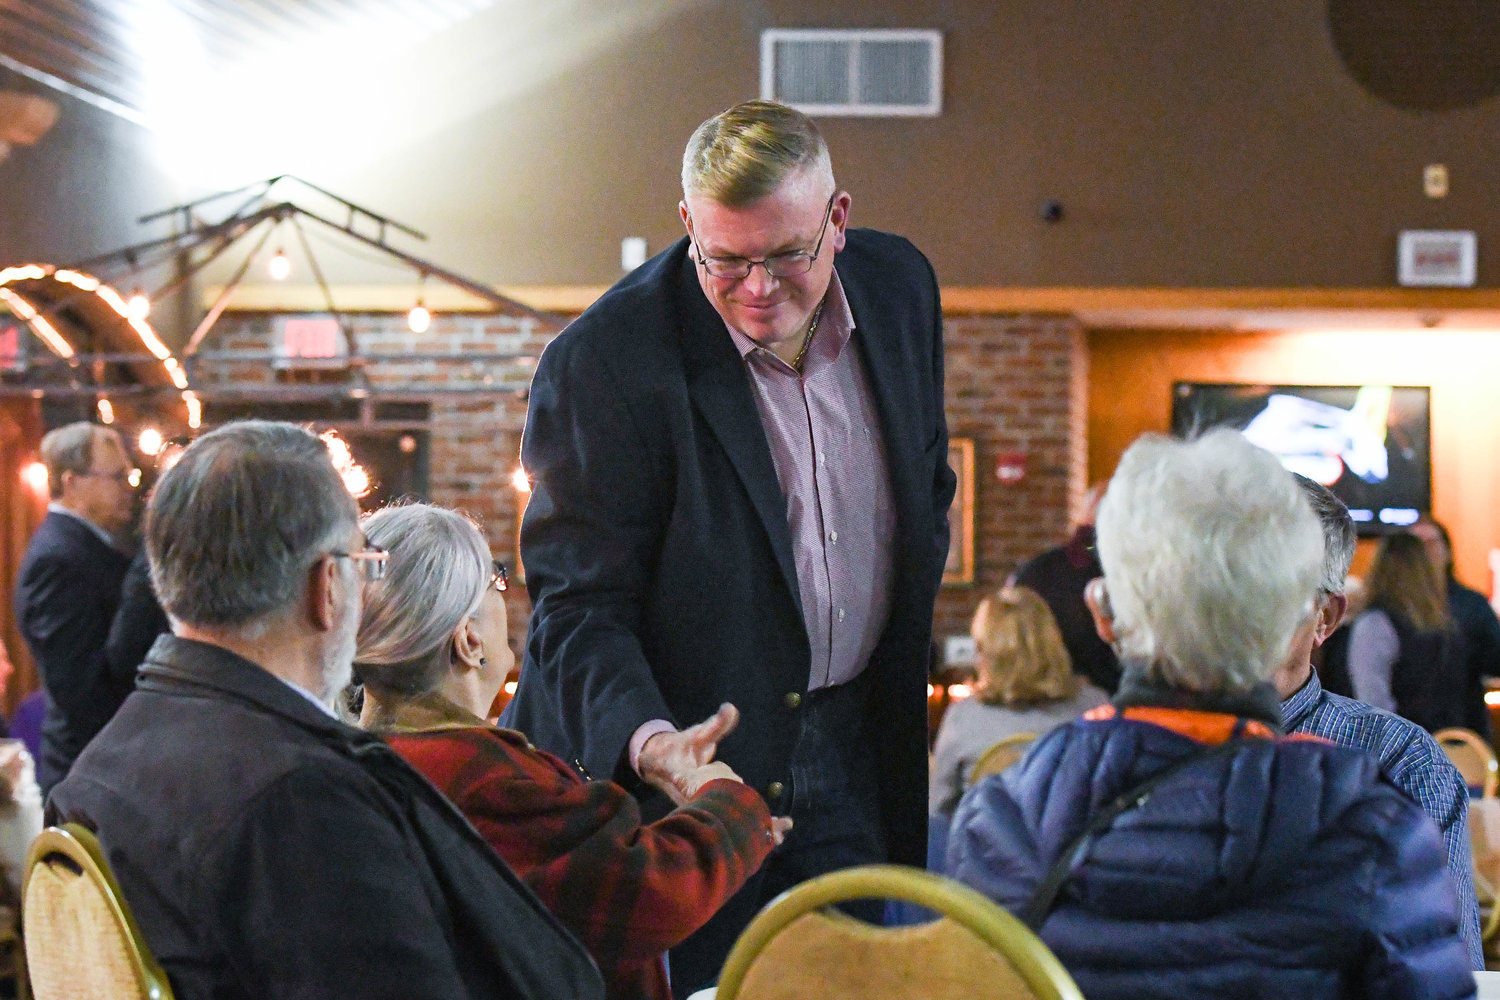 Oneida County Sheriff Robert Maciol shakes hands with supporters during an election party hosted on Tuesday night at Aqua Vino Restaurant in Utica.